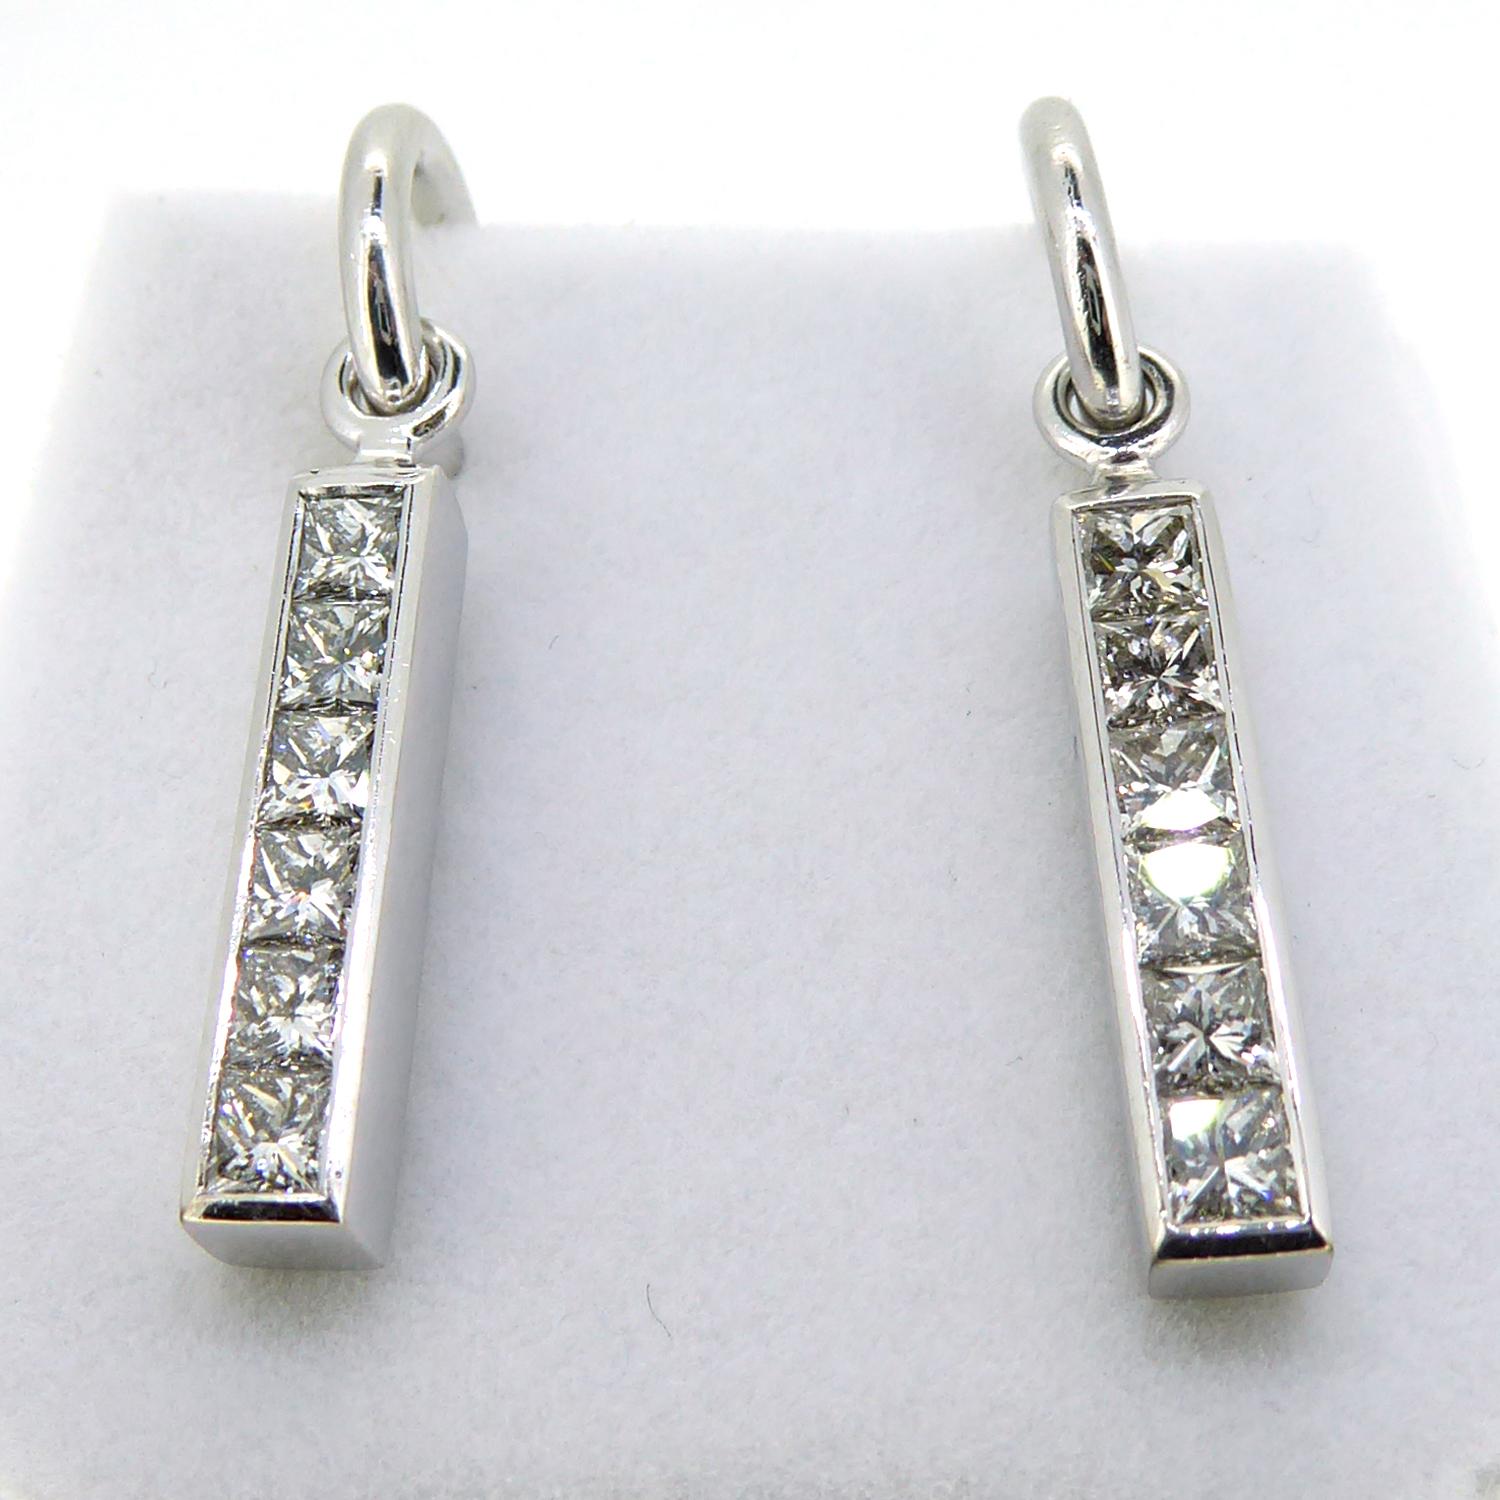 Marvellous contemporary diamond drop earrings set with a total of 2.0ct of brilliant cut stones.  Designed by the renowned British designer, Theo Fennell, these earrings are from a previous range known as Strip!  Each earring comprises a